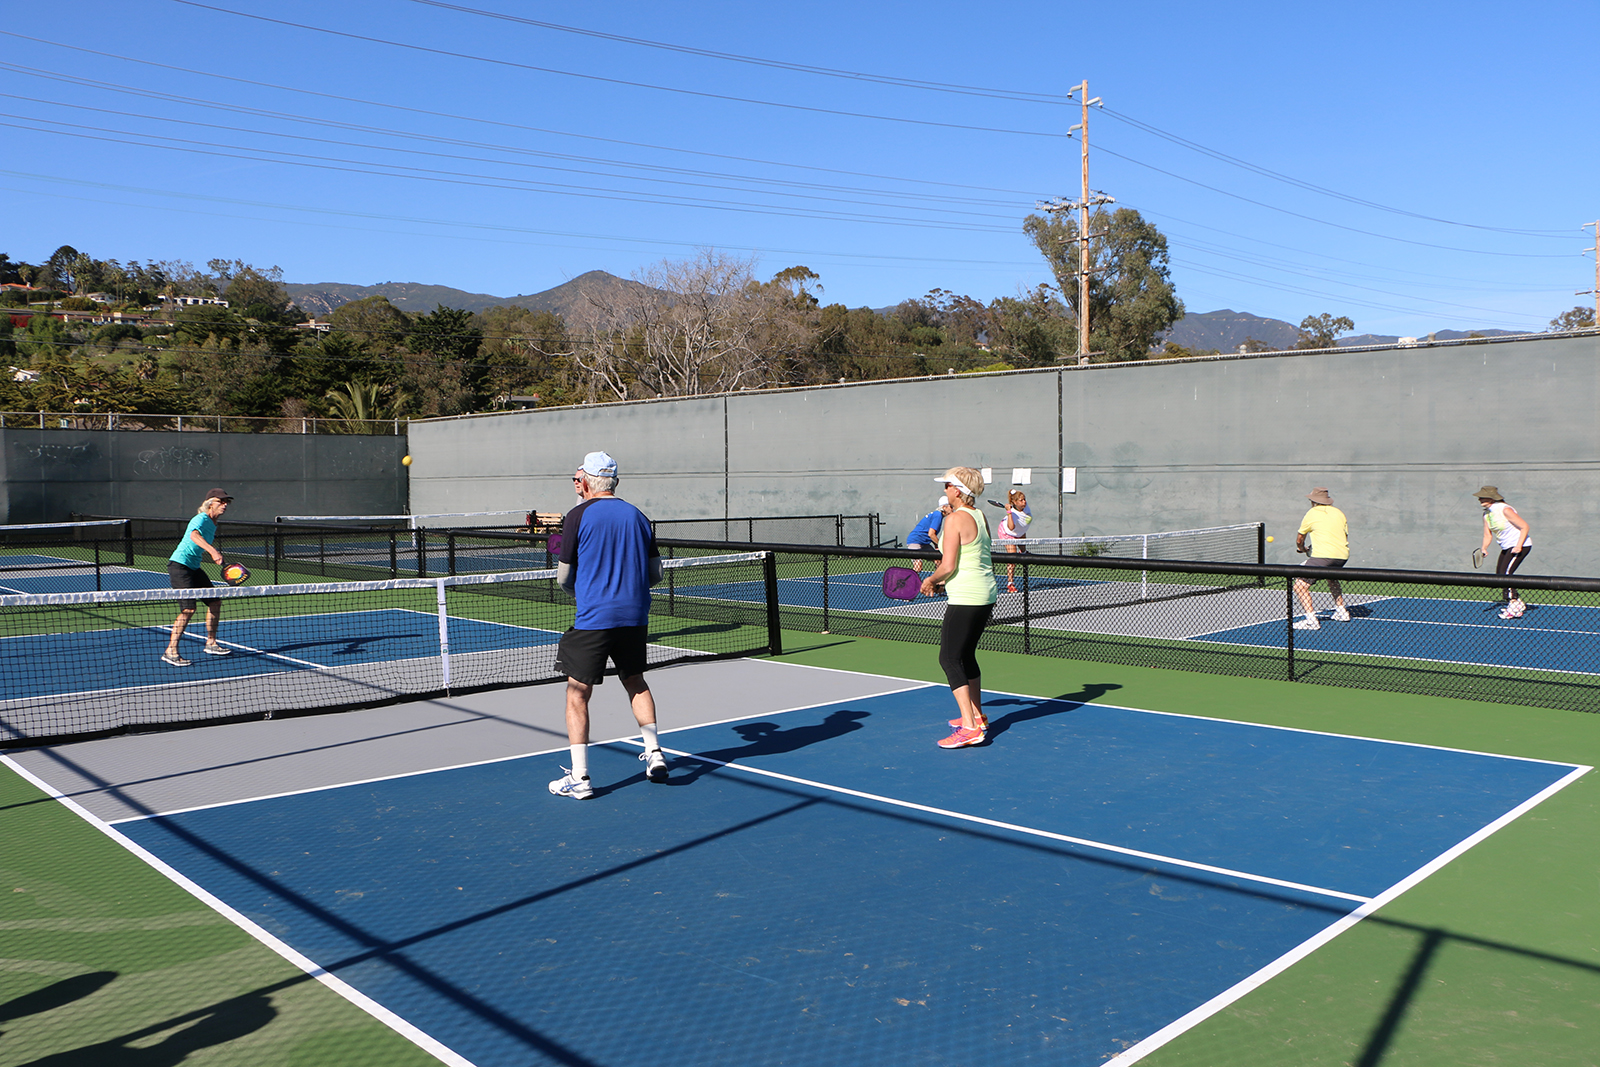 Community members play pickleball at the Municipal Tennis Courts